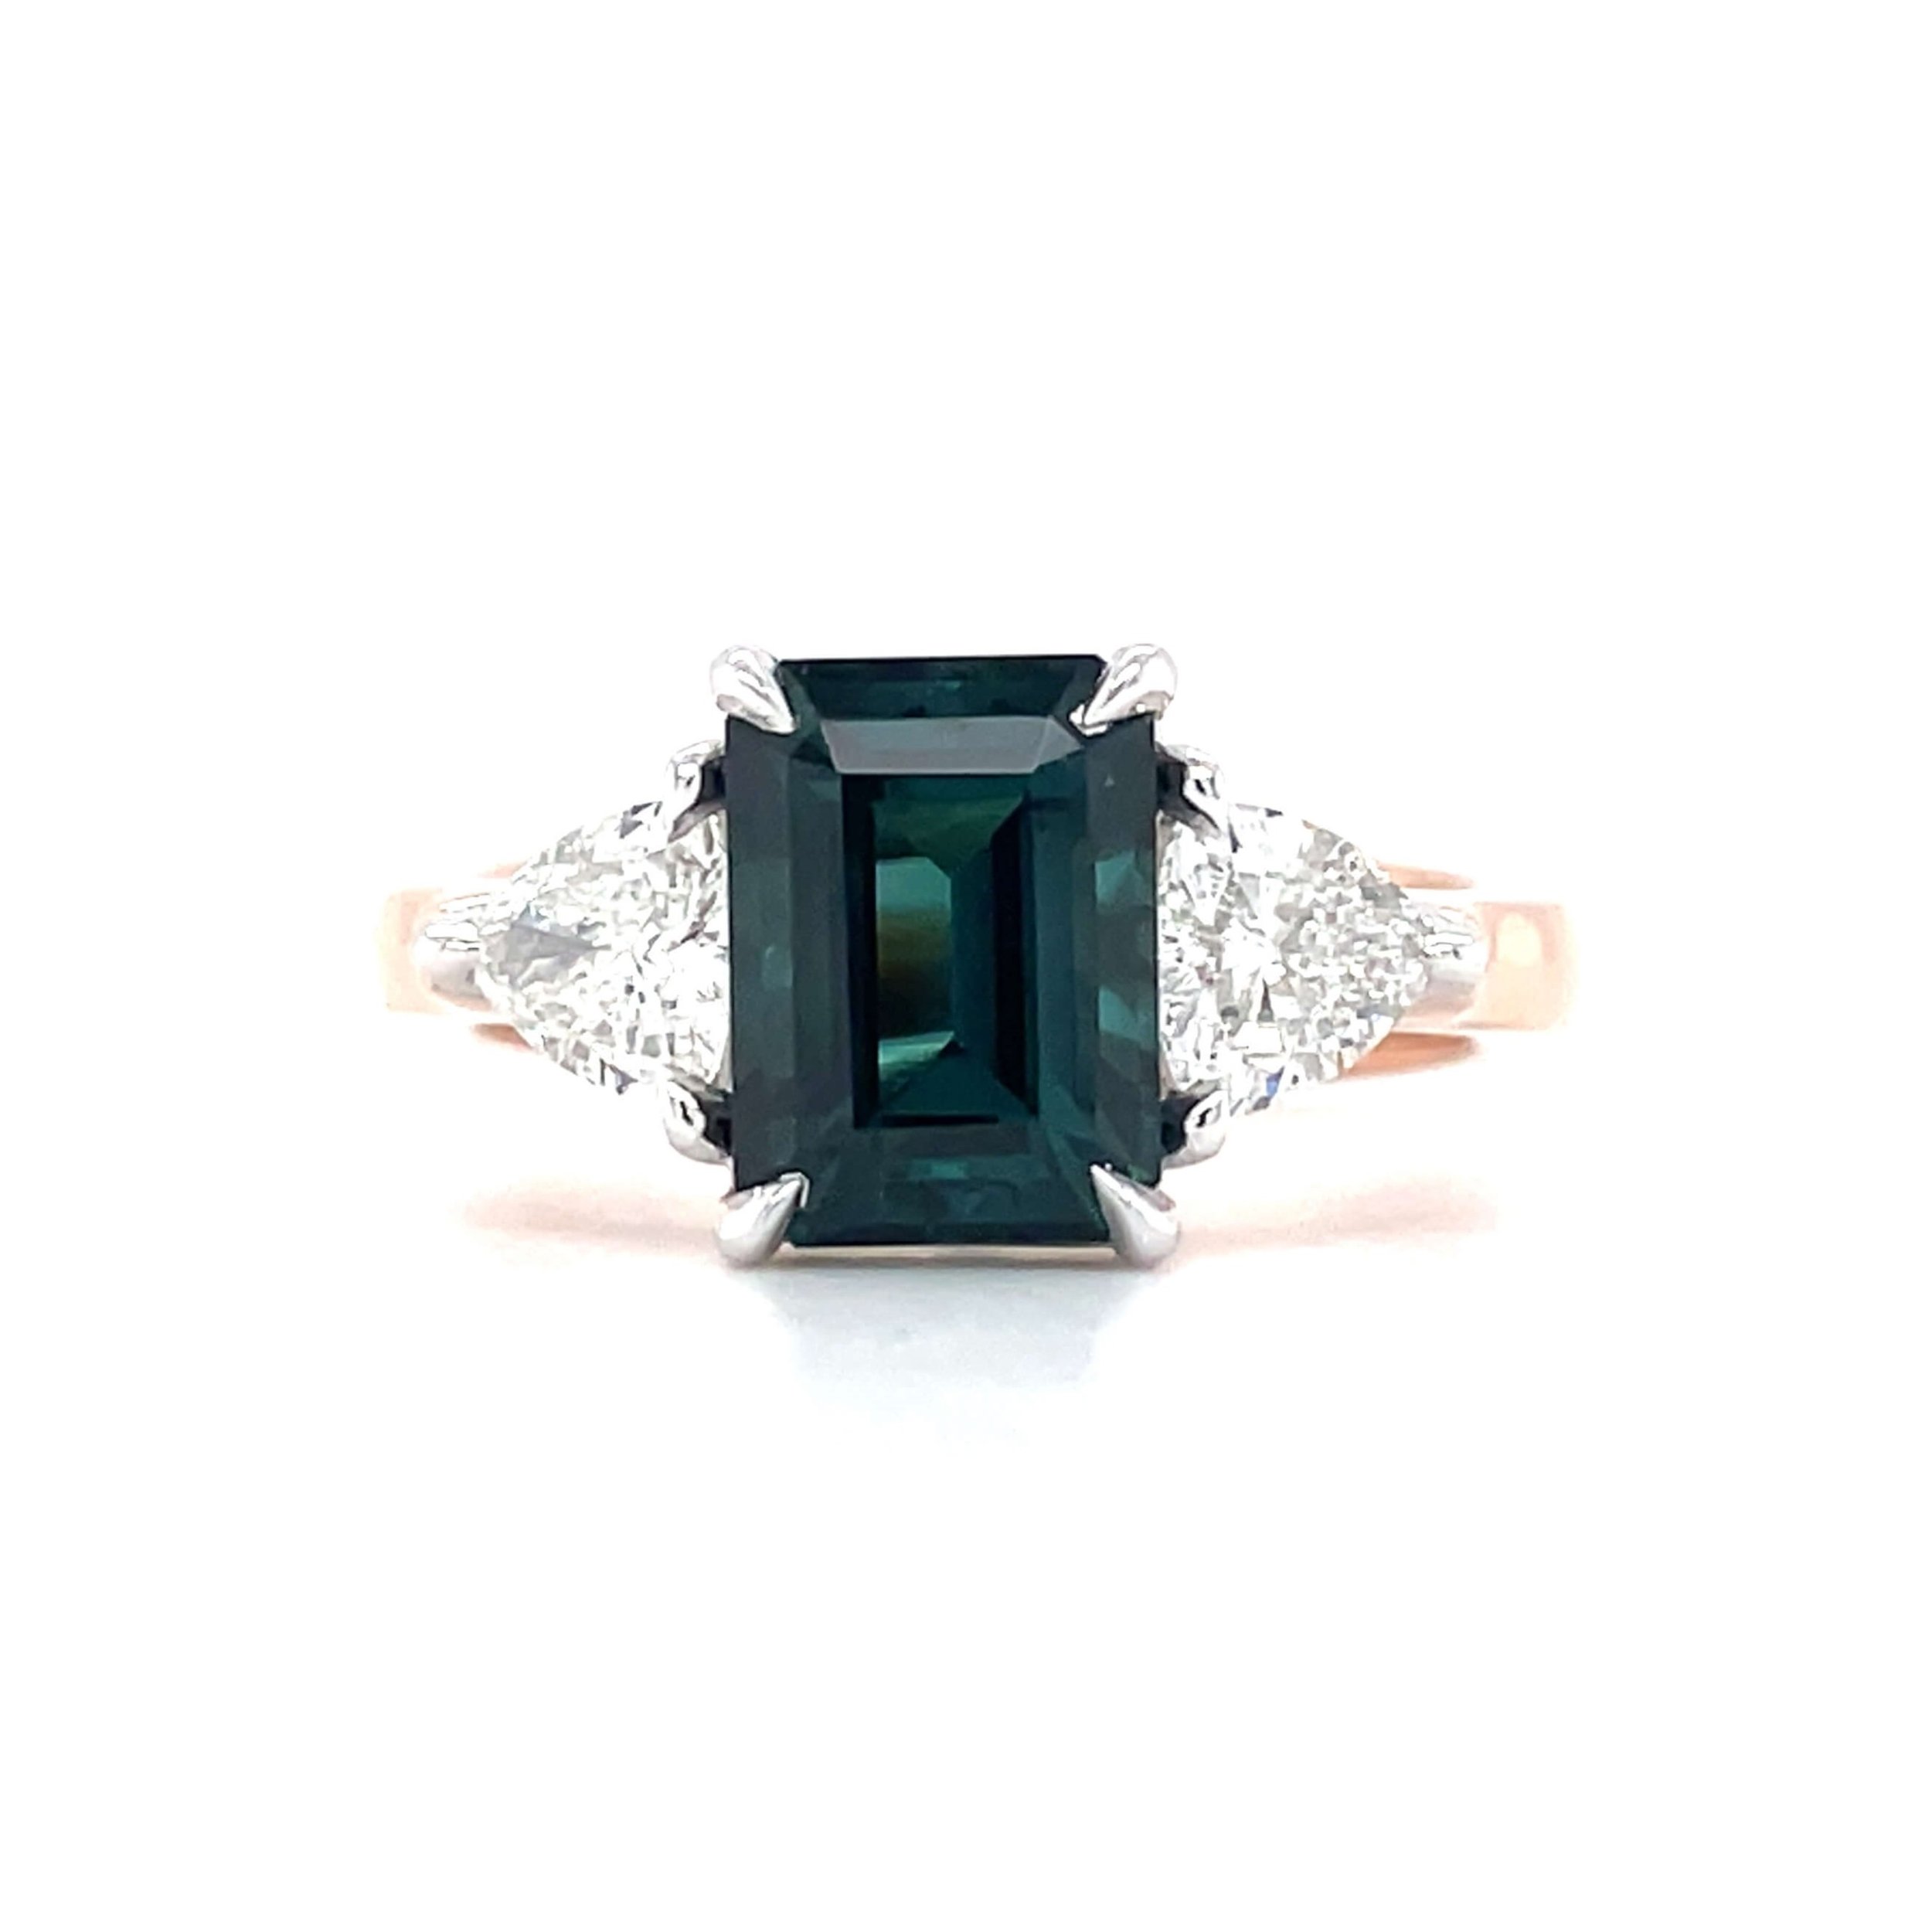 INDICOLITE TOURMALINE RING VINTAGE STYLE 14k WHITE GOLD NATURAL GREEN  COCKTAIL